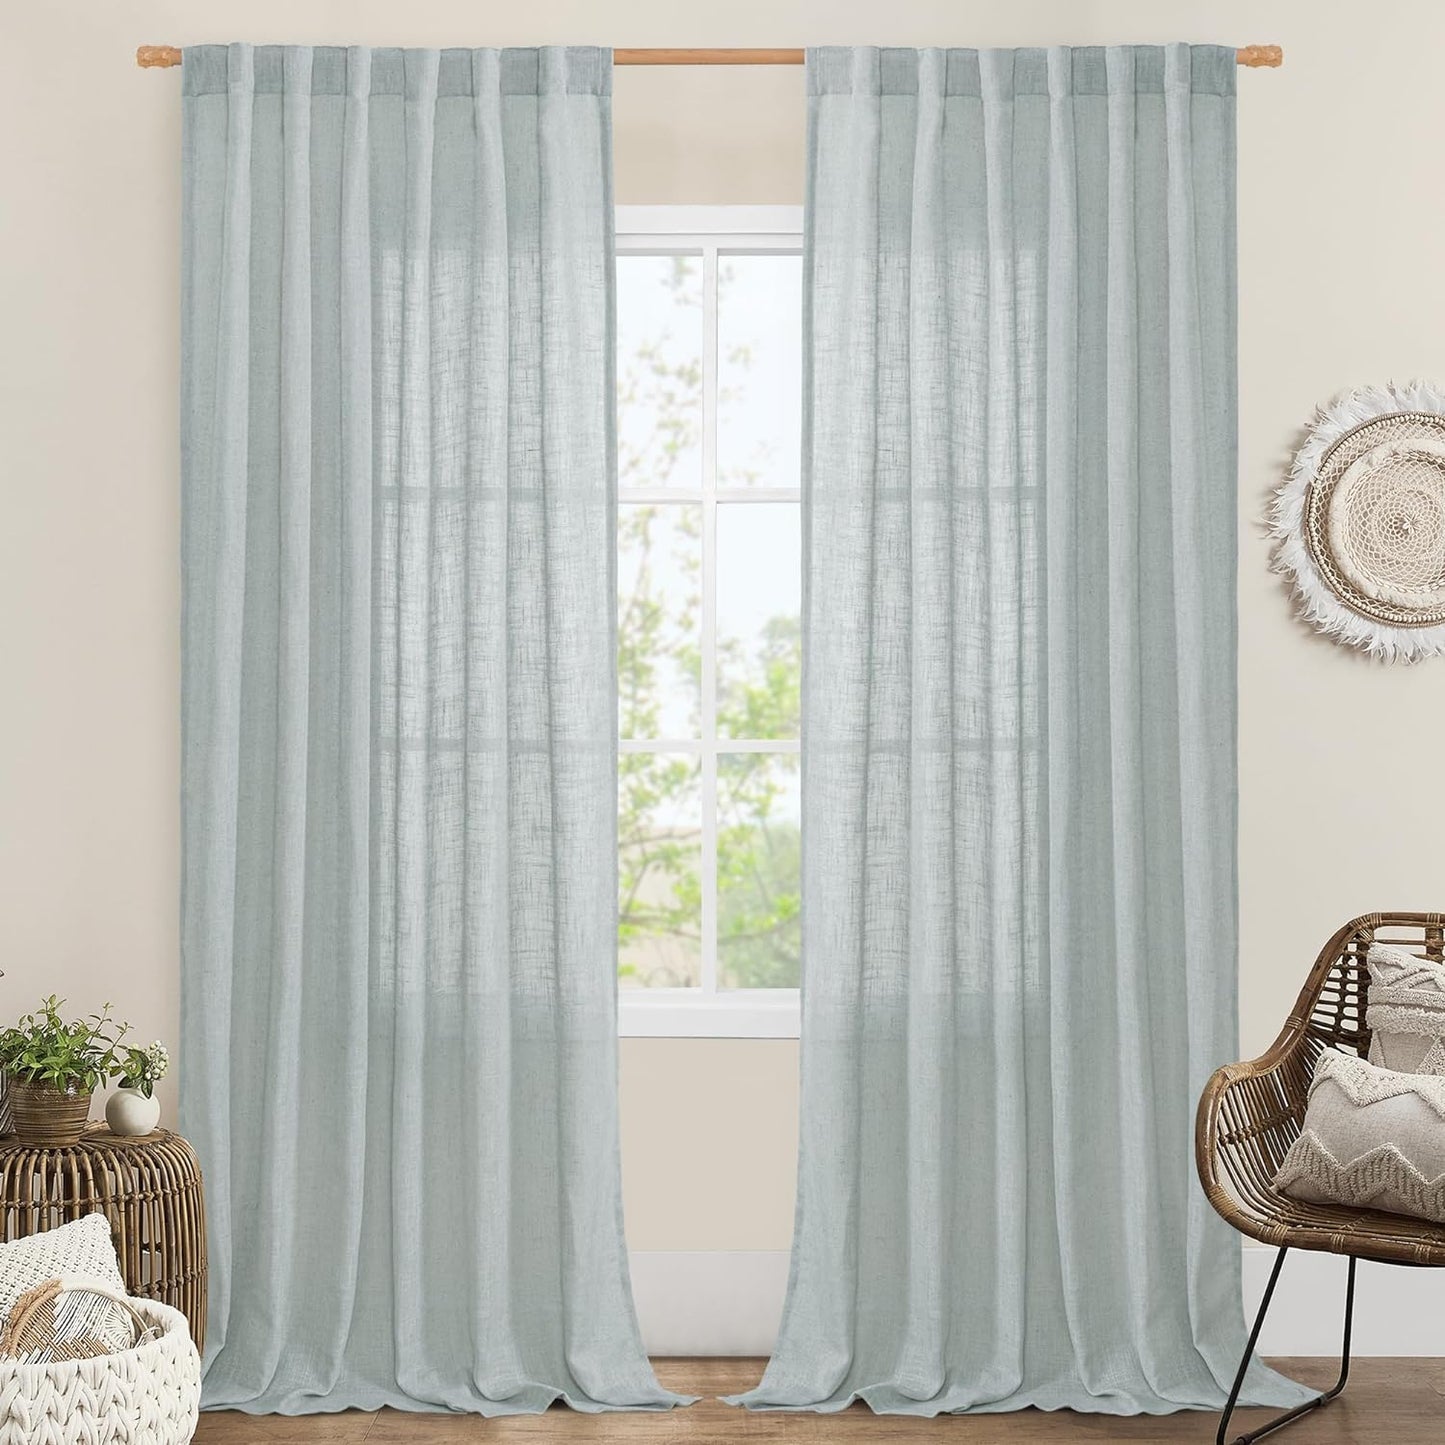 LAMIT Natural Linen Blended Curtains for Living Room, Back Tab and Rod Pocket Semi Sheer Curtains Light Filtering Country Rustic Drapes for Bedroom/Farmhouse, 2 Panels,52 X 108 Inch, Linen  LAMIT Greyish Blue 52W X 84L 